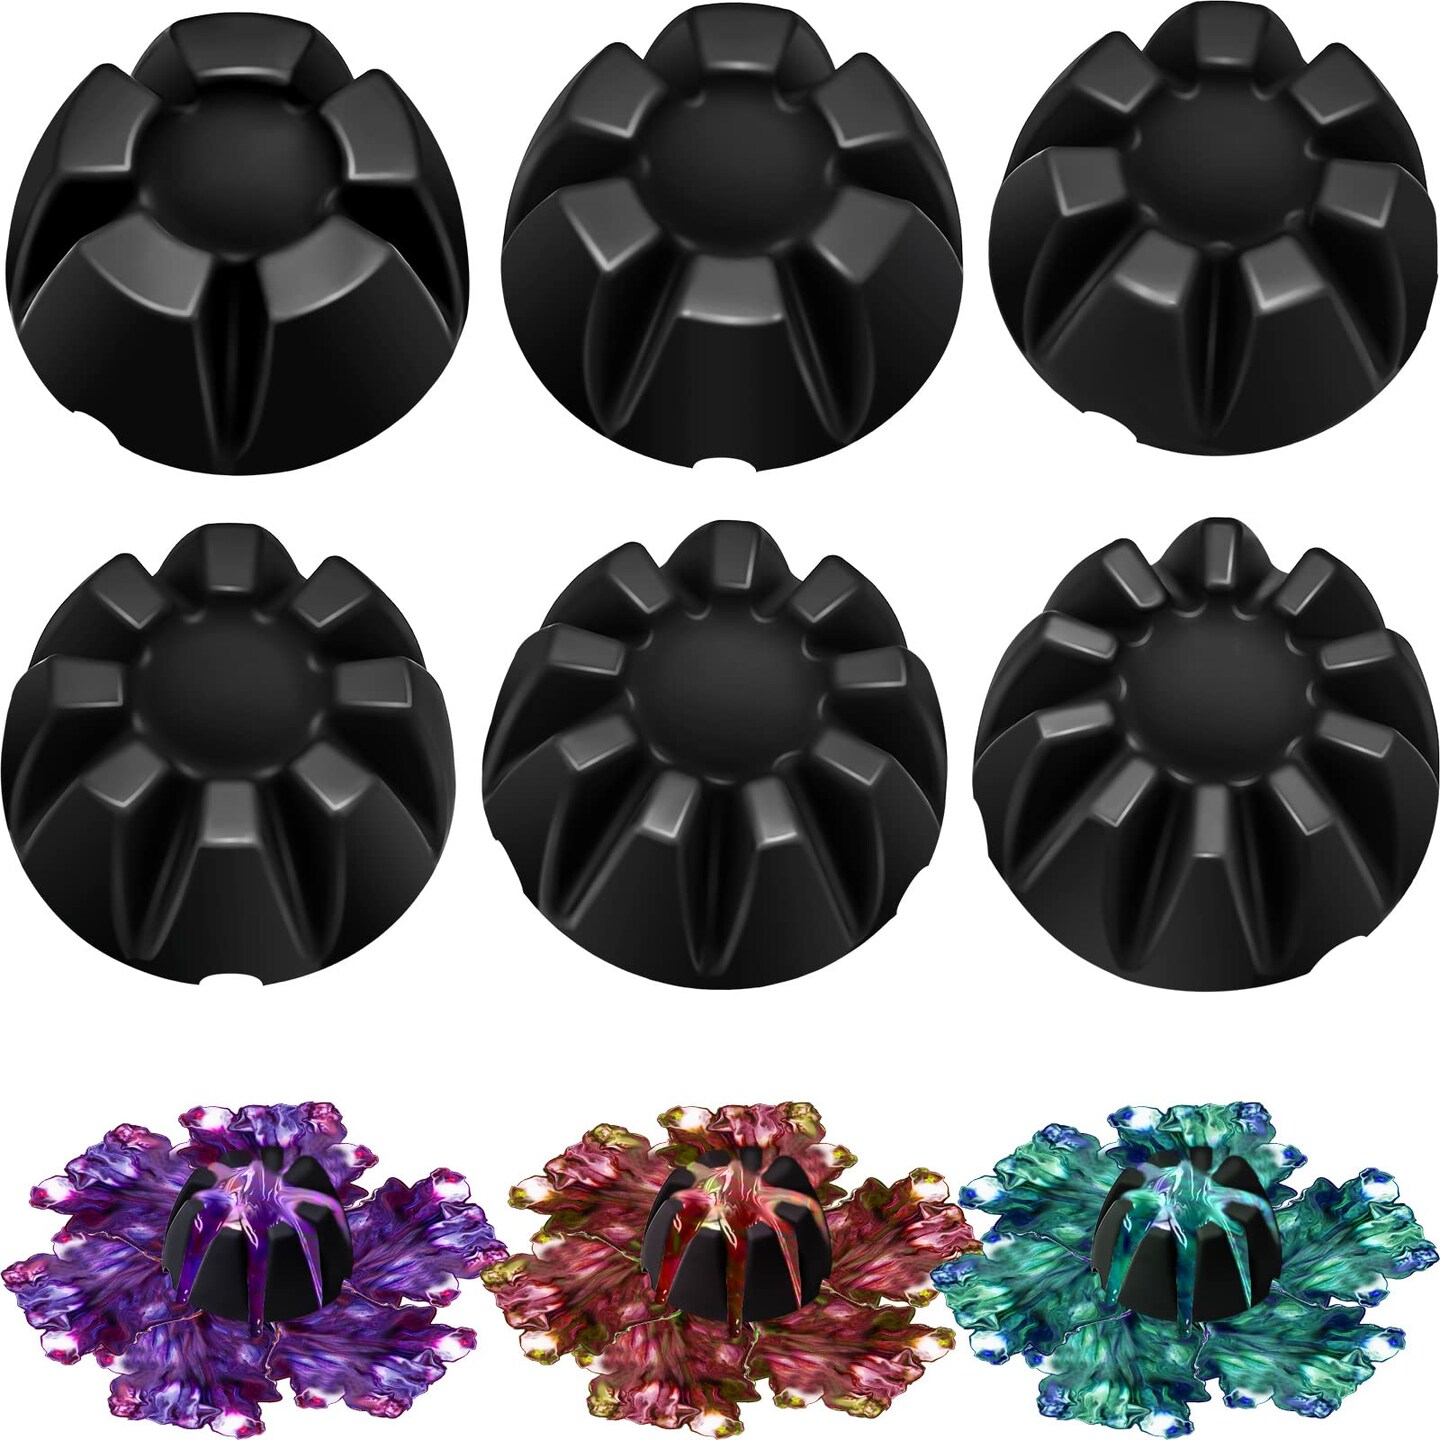 6 Pieces Flower Pour Cup for Paint Pouring 6/7/8/9/10 Slot Acrylic Paint Tools Fluid Painting Supplies Flower Strainer for DIY Pouring Paint and Creating Patterns Art Supplies(Black)